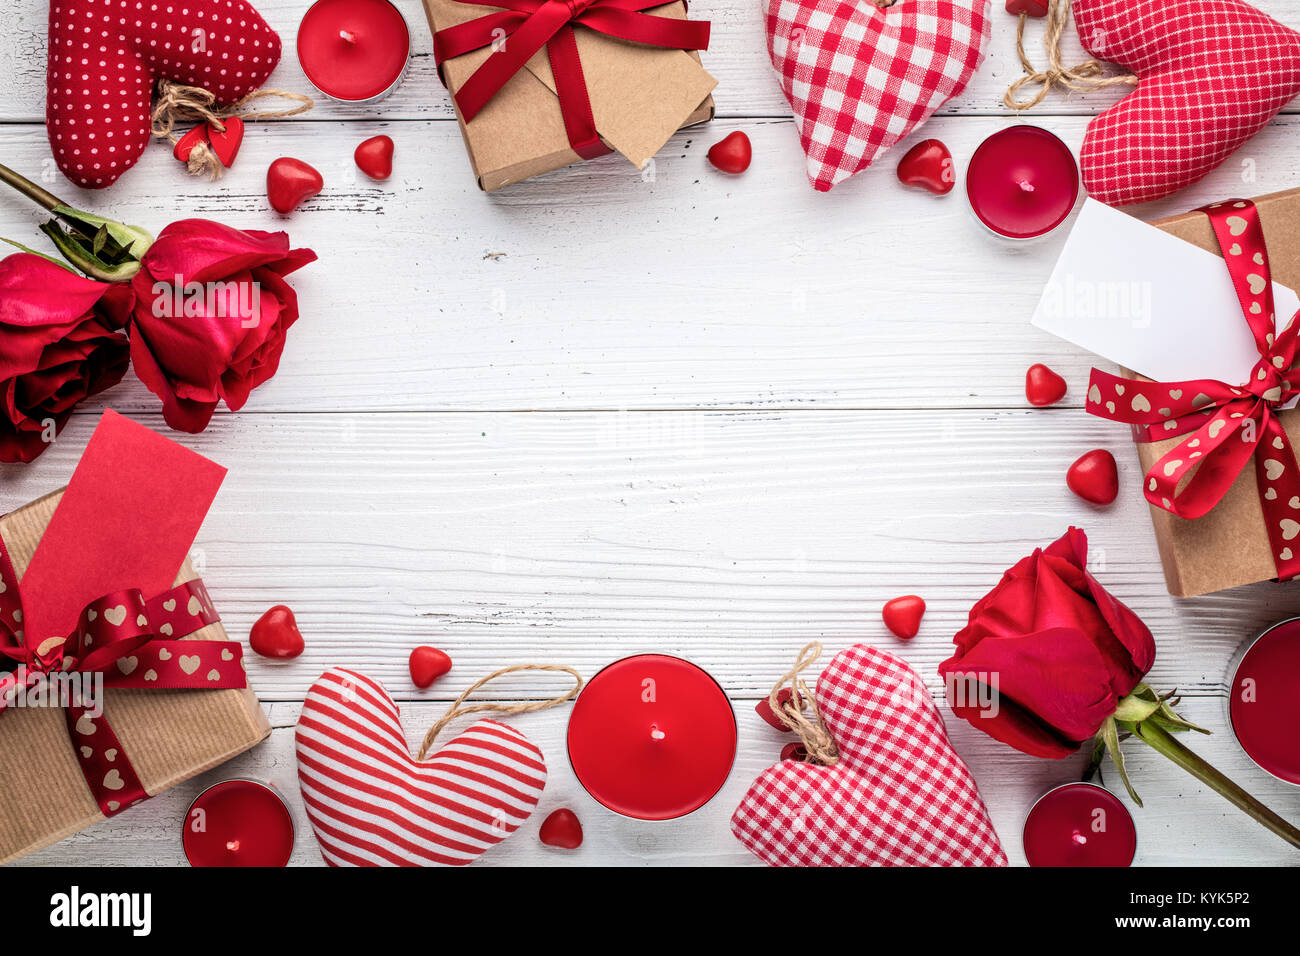 Valentine background with gift boxes,rose,gift boxes and chocolate. Stock Photo